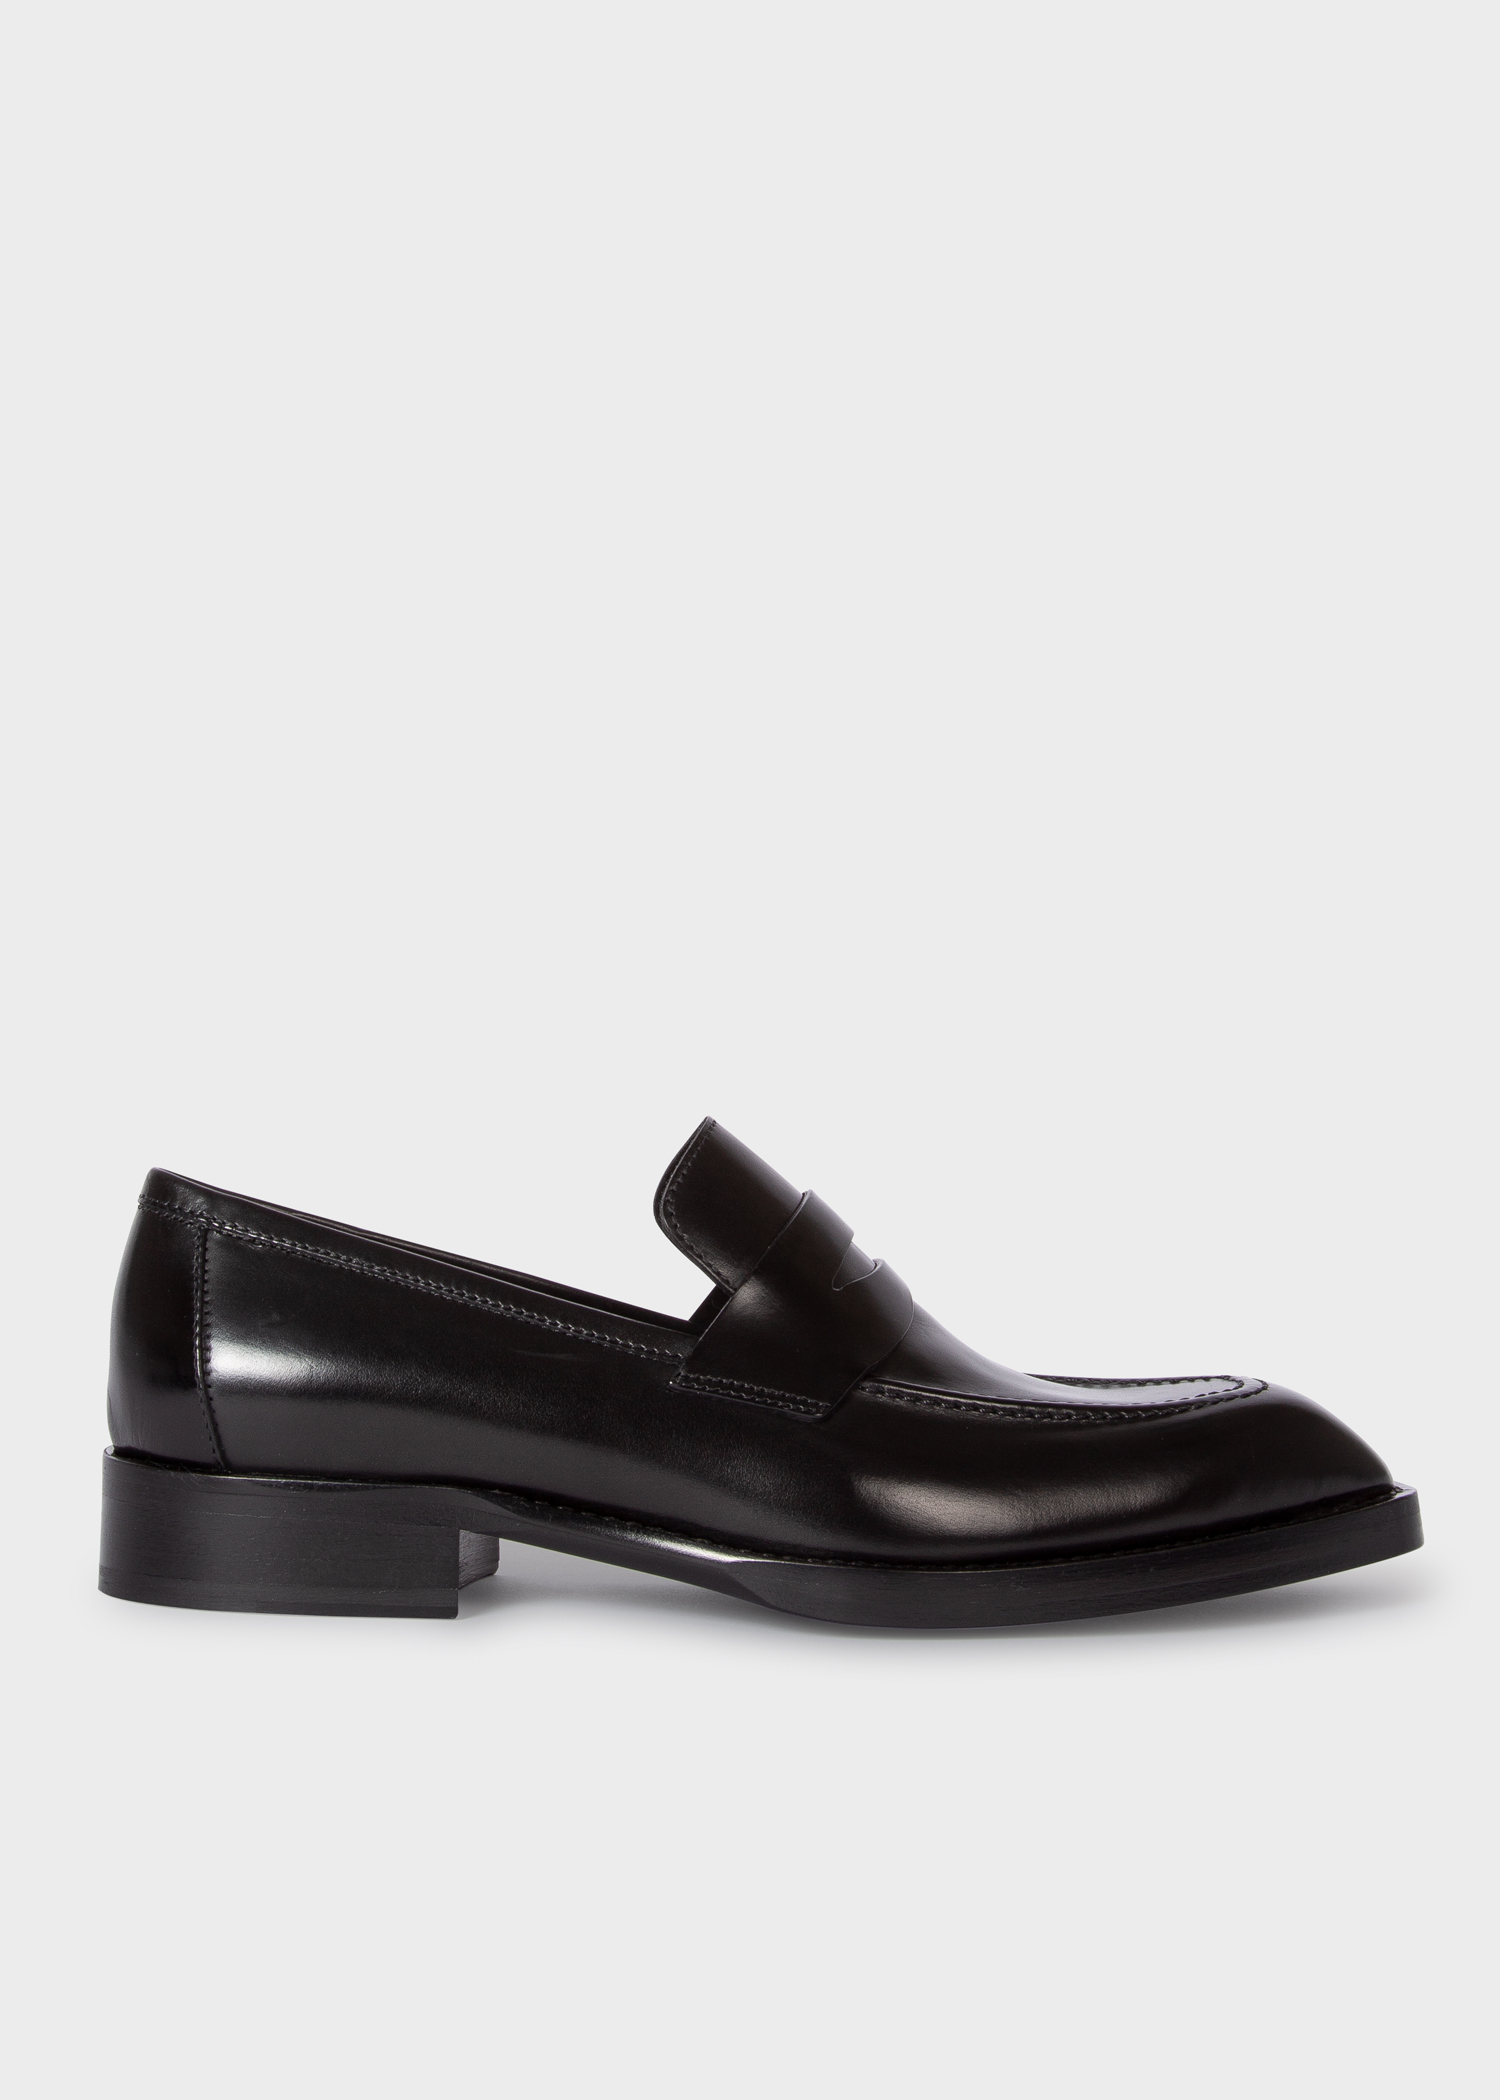 Women's Black 'Cave' Leather Loafers